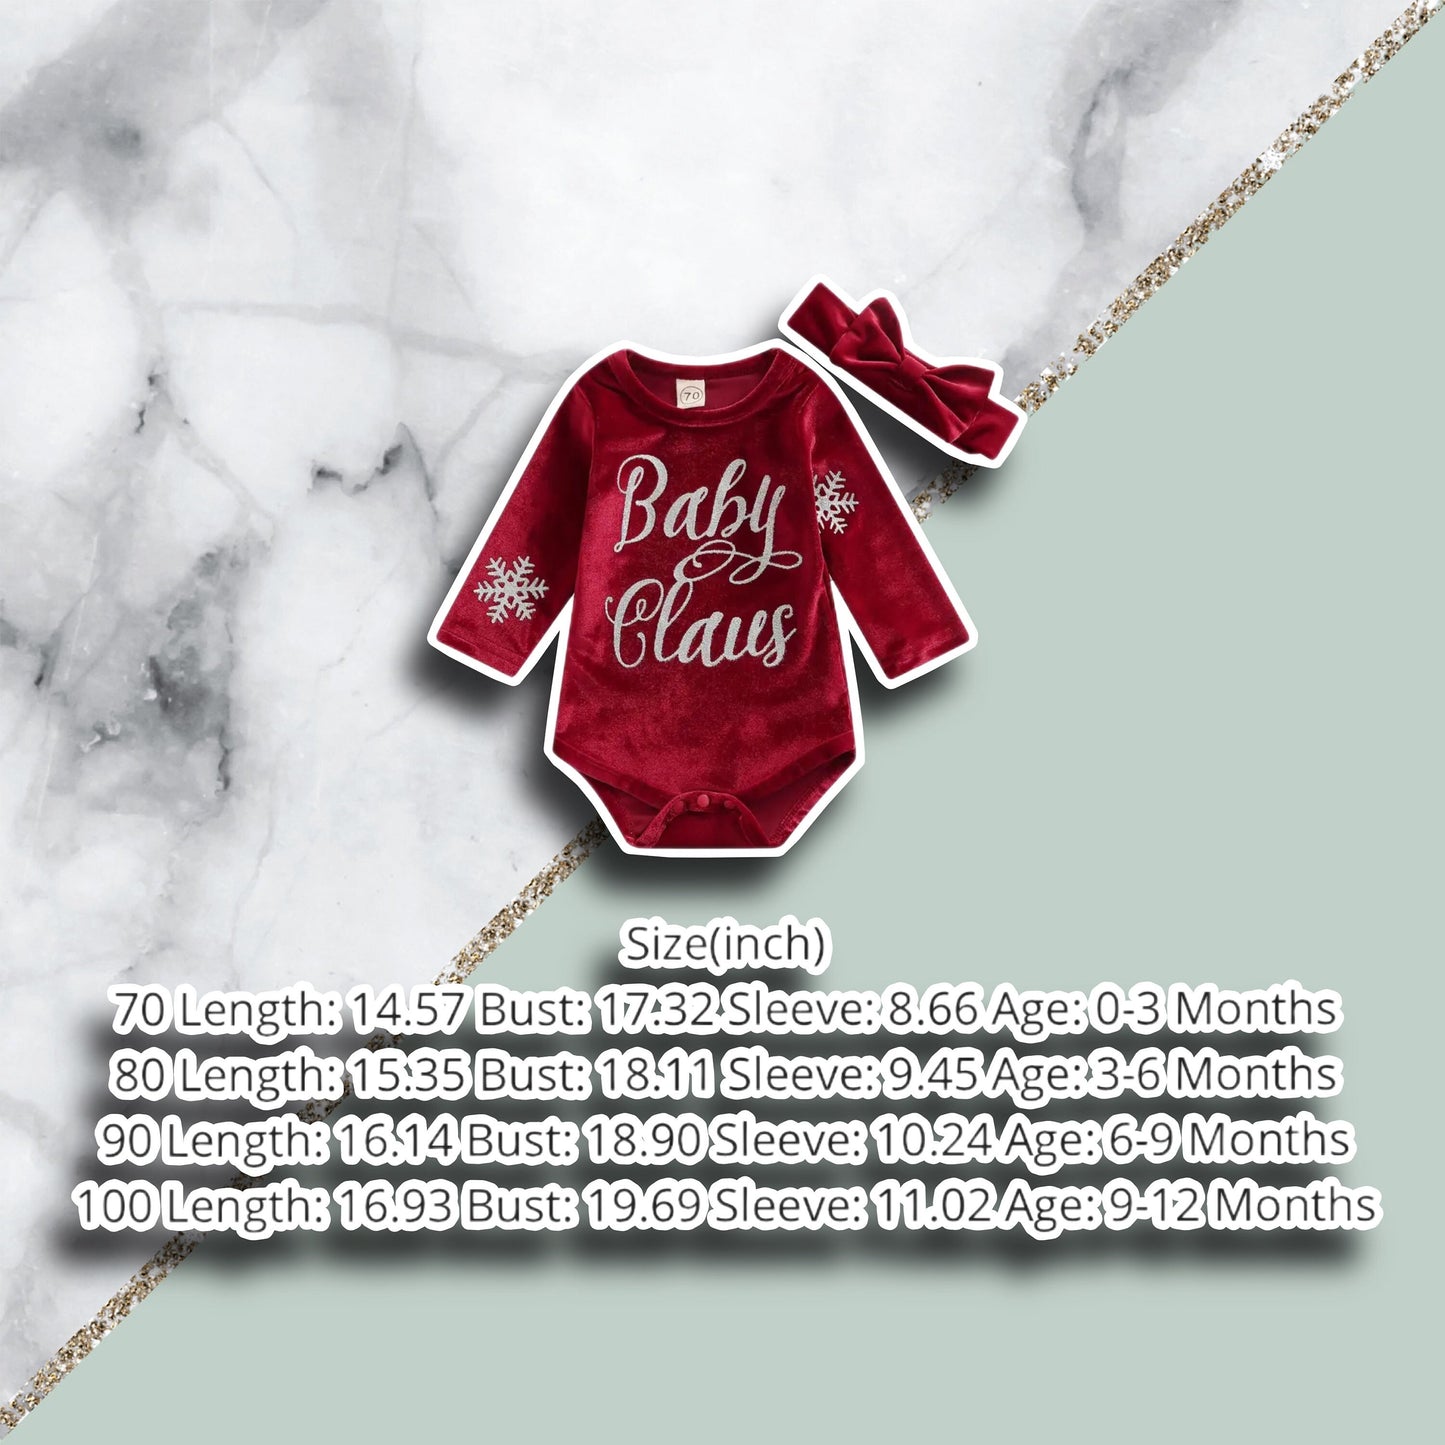 Baby Claus Red Velvet Baby Romper with Bow